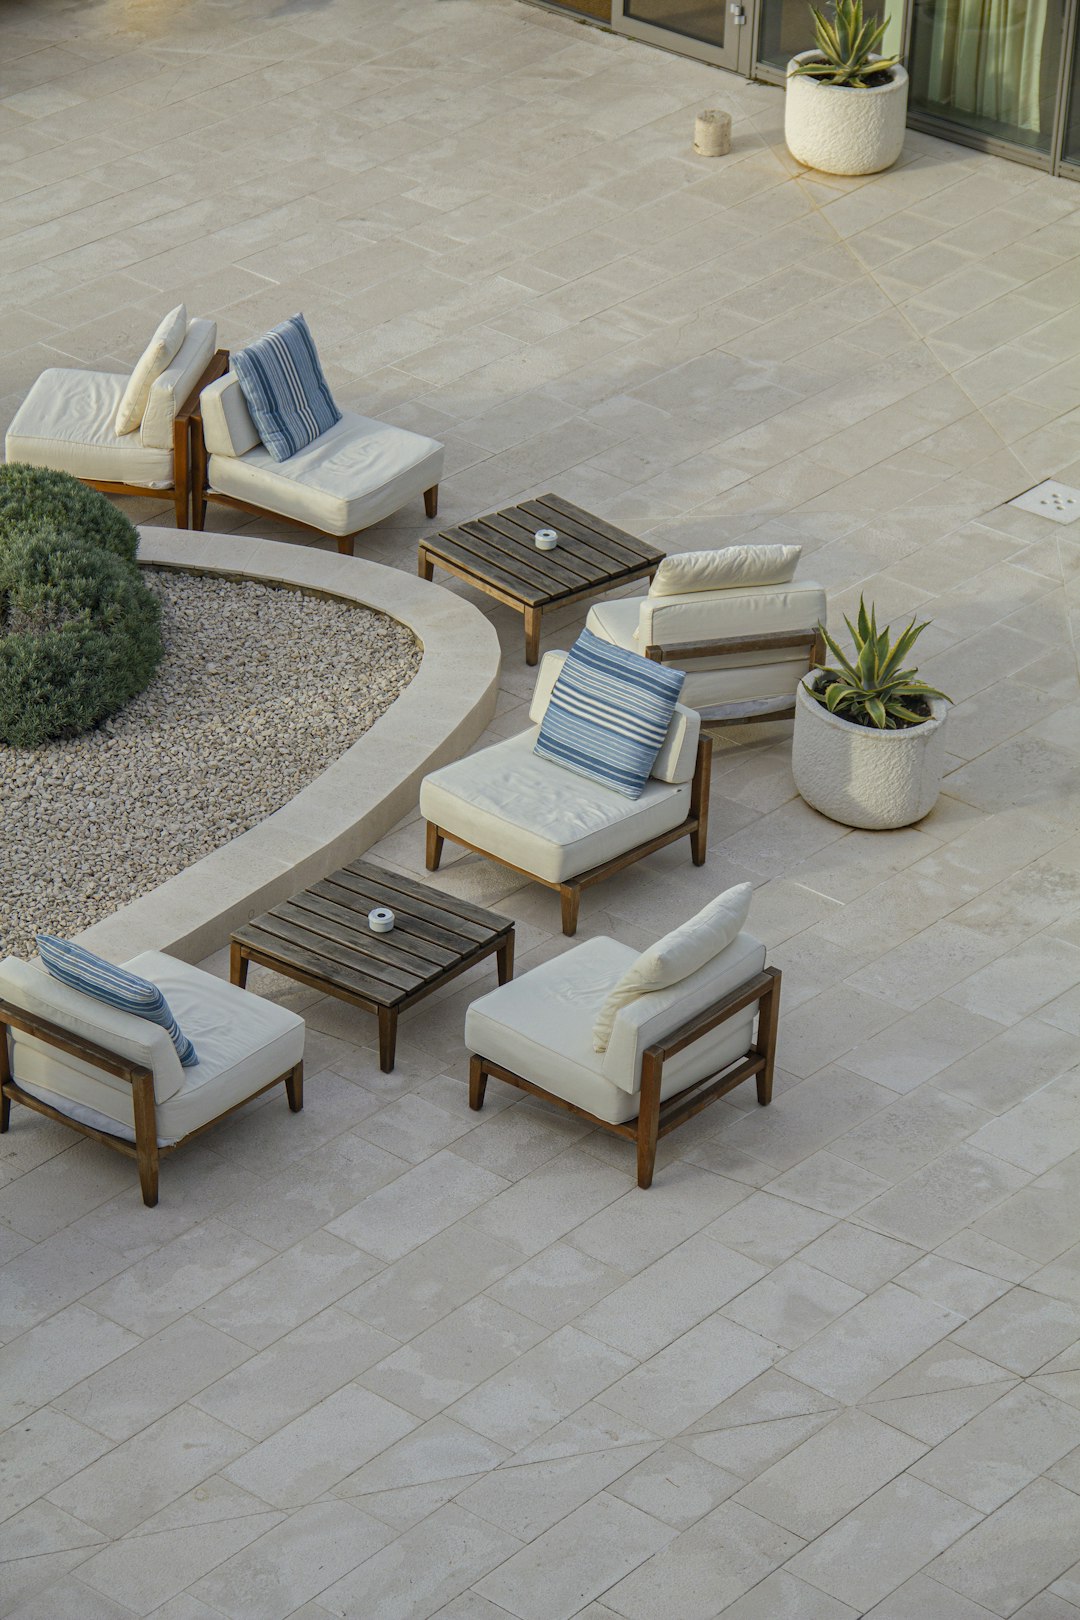 Maximizing Small Spaces with Multifunctional Patio Furniture